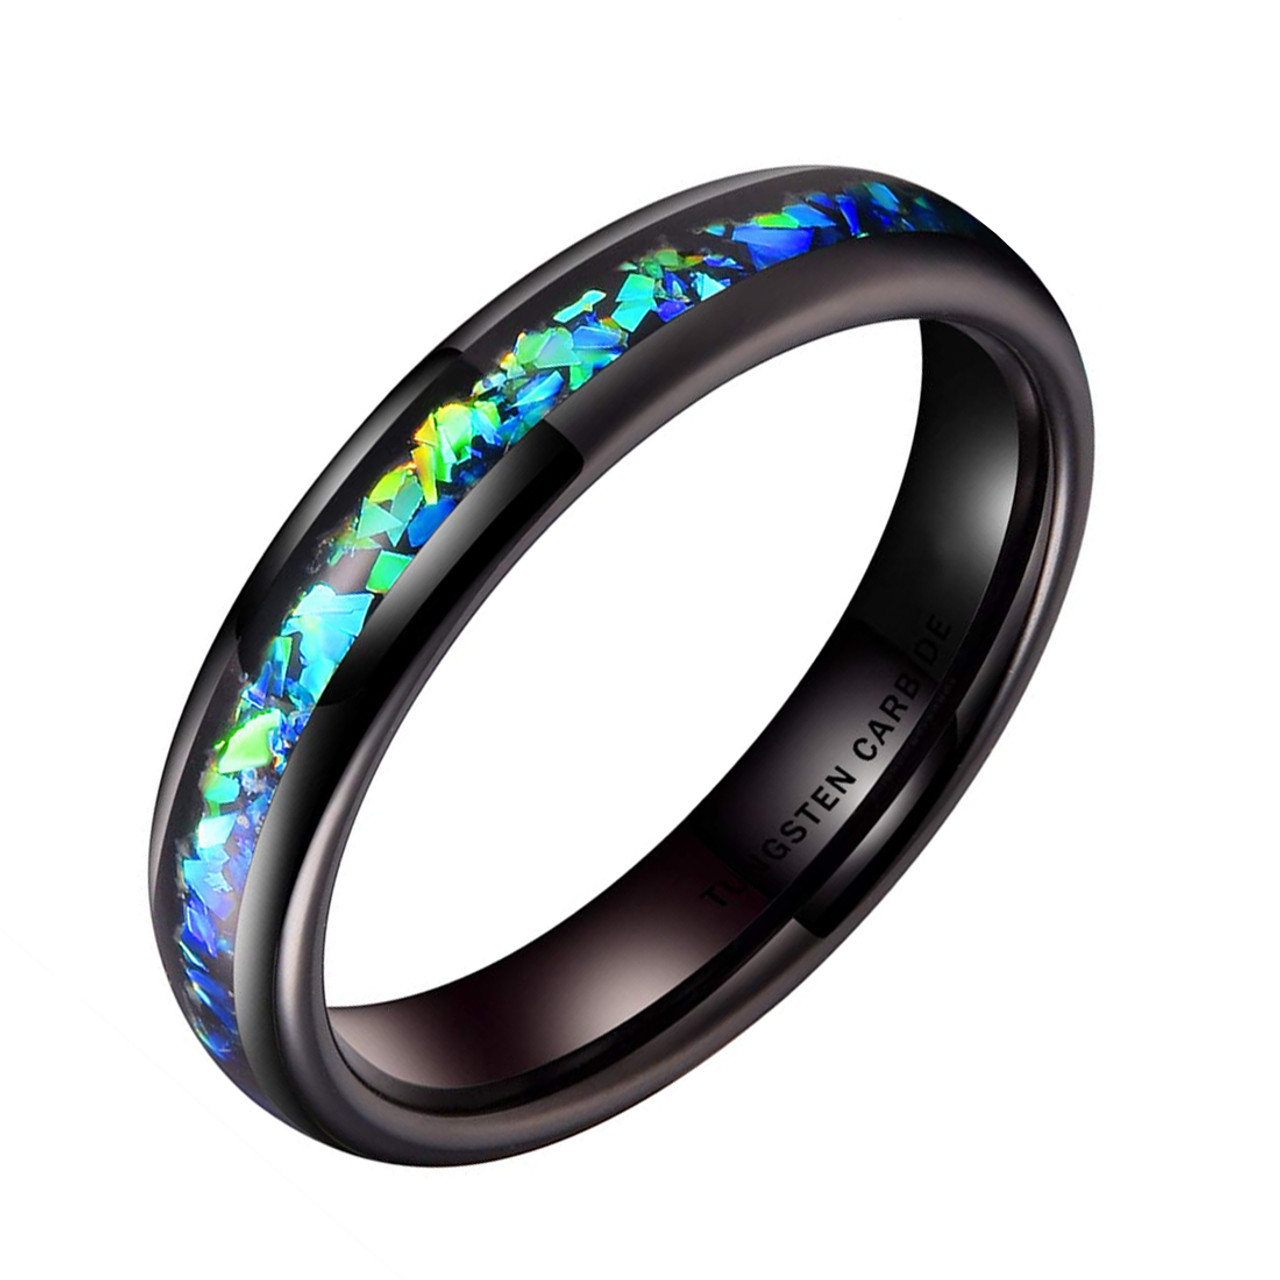 (4mm) Women's Tungsten Carbide Wedding Ring Band - Black Tone with Vibrant Blue and Green Inlay Ring. 